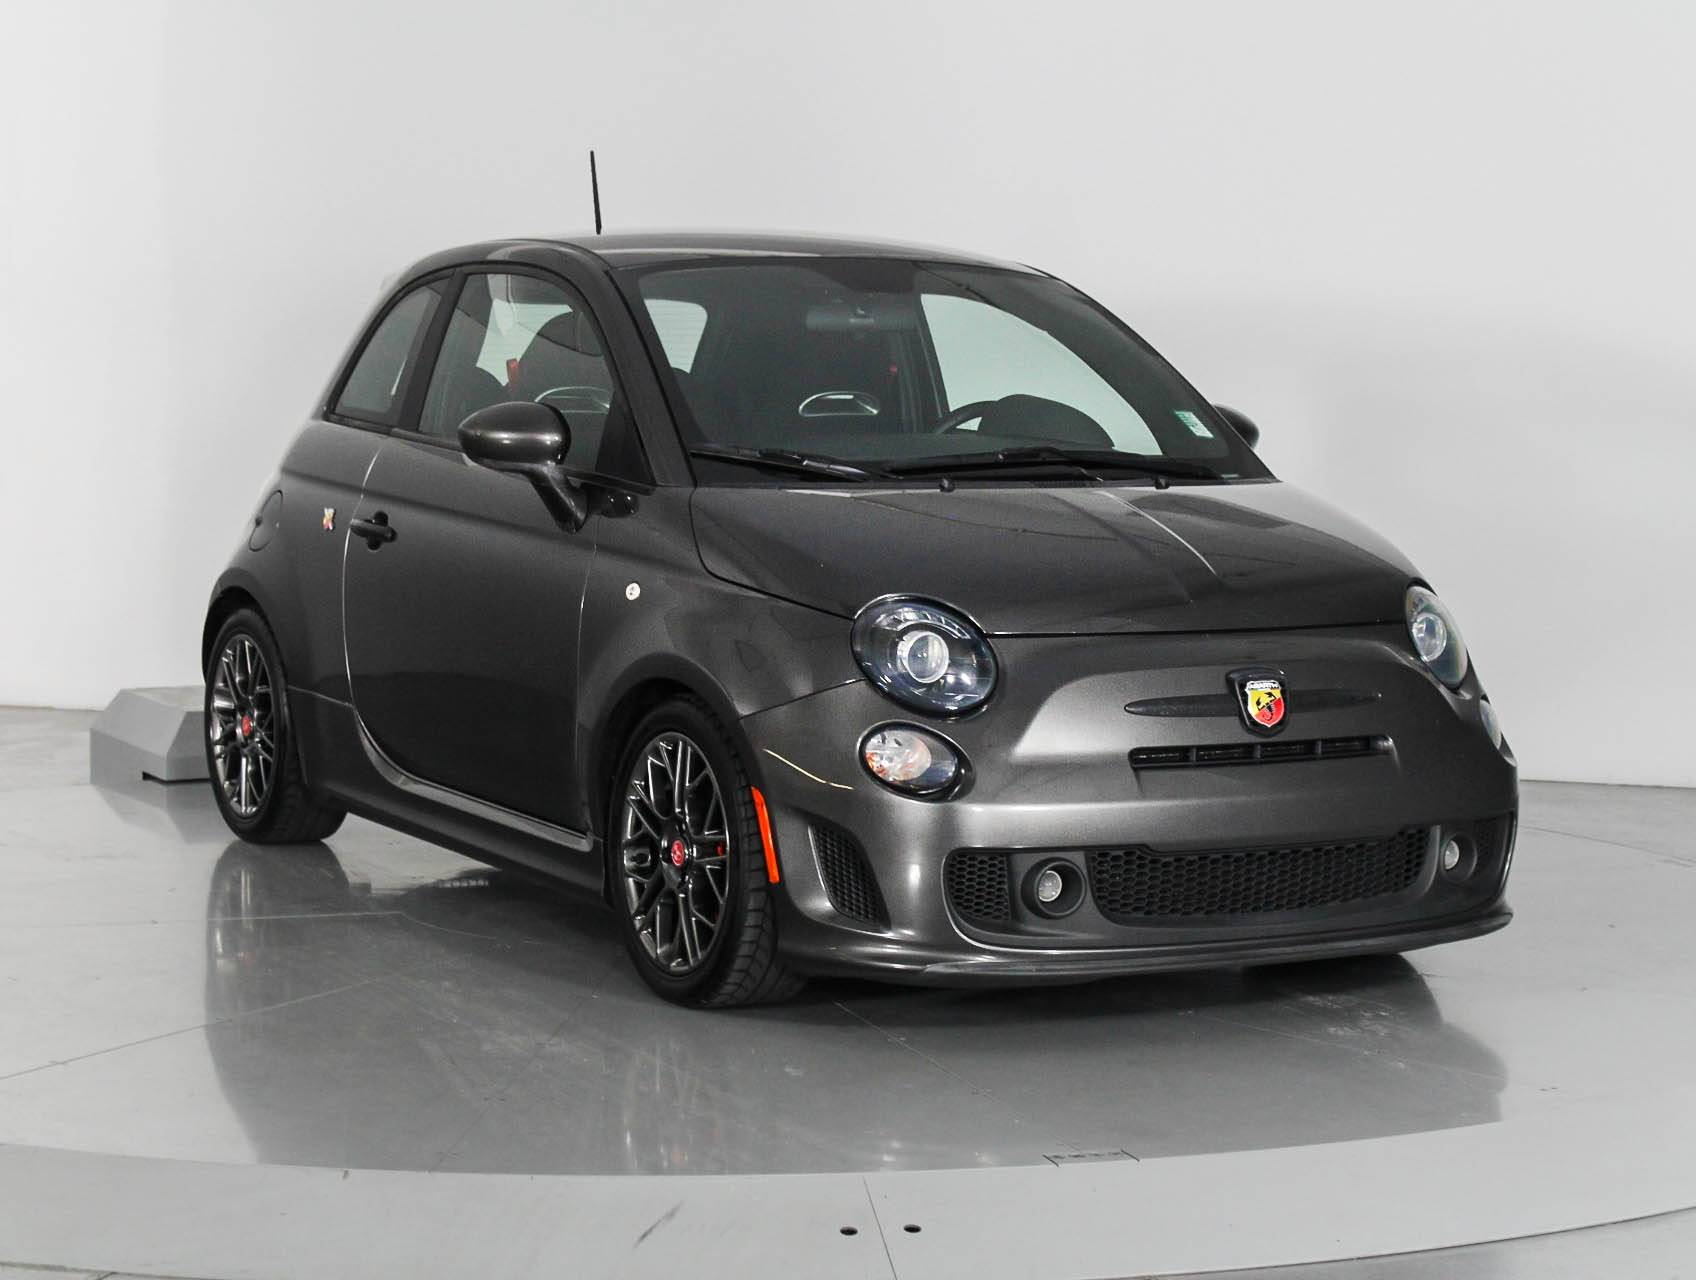 Used 2014 FIAT 500 ABARTH for sale in WEST | 85985